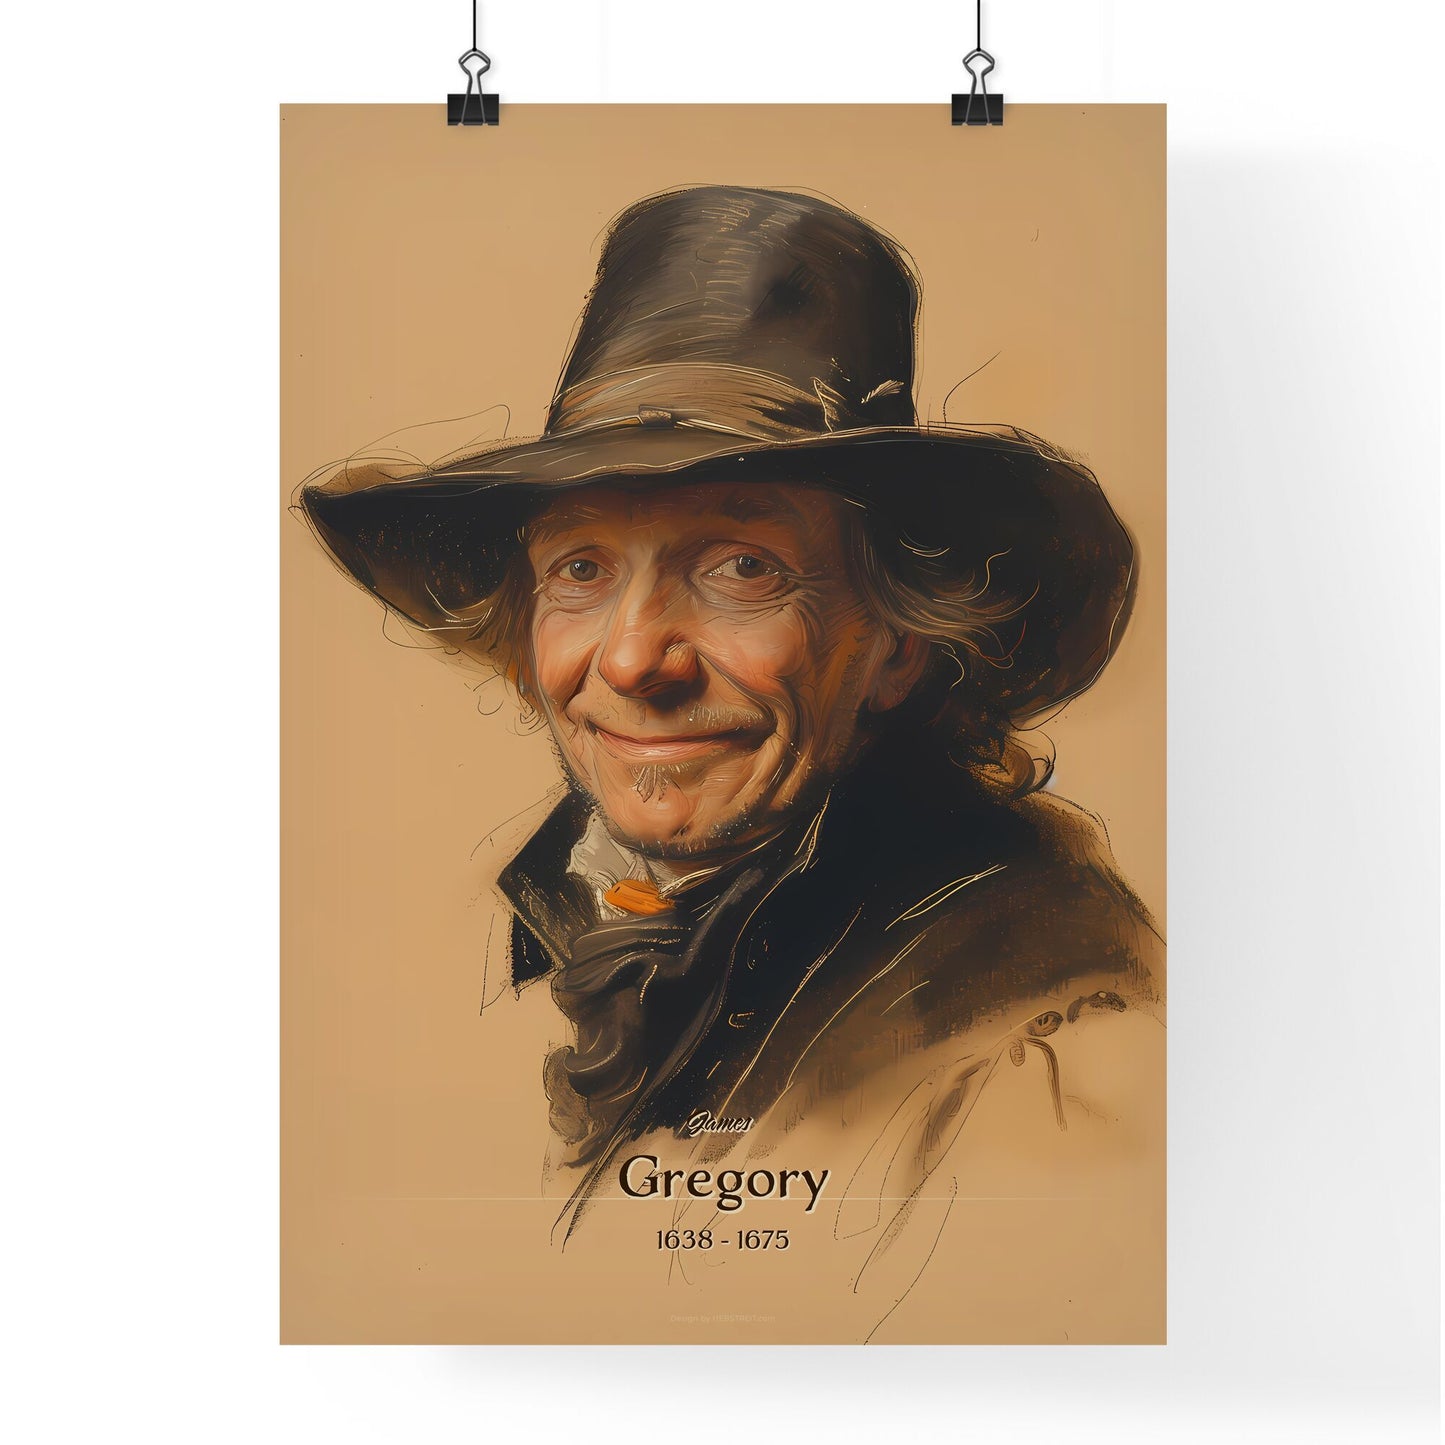 James, Gregory, 1638 - 1675, A Poster of a man wearing a hat Default Title